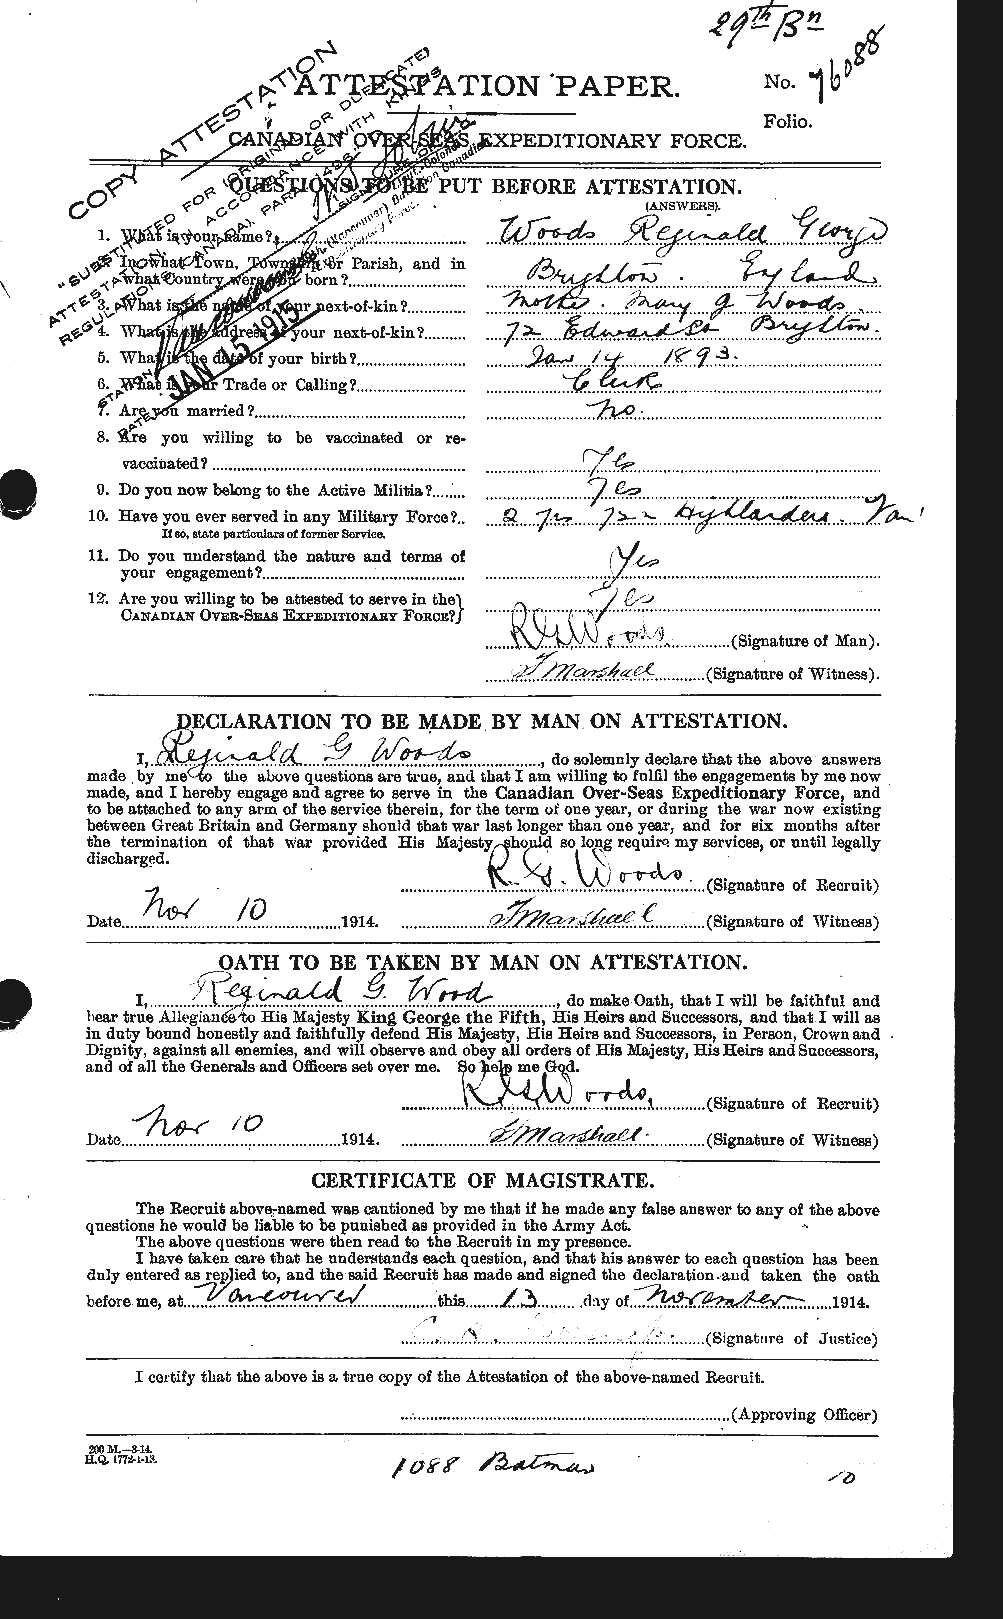 Personnel Records of the First World War - CEF 683424a